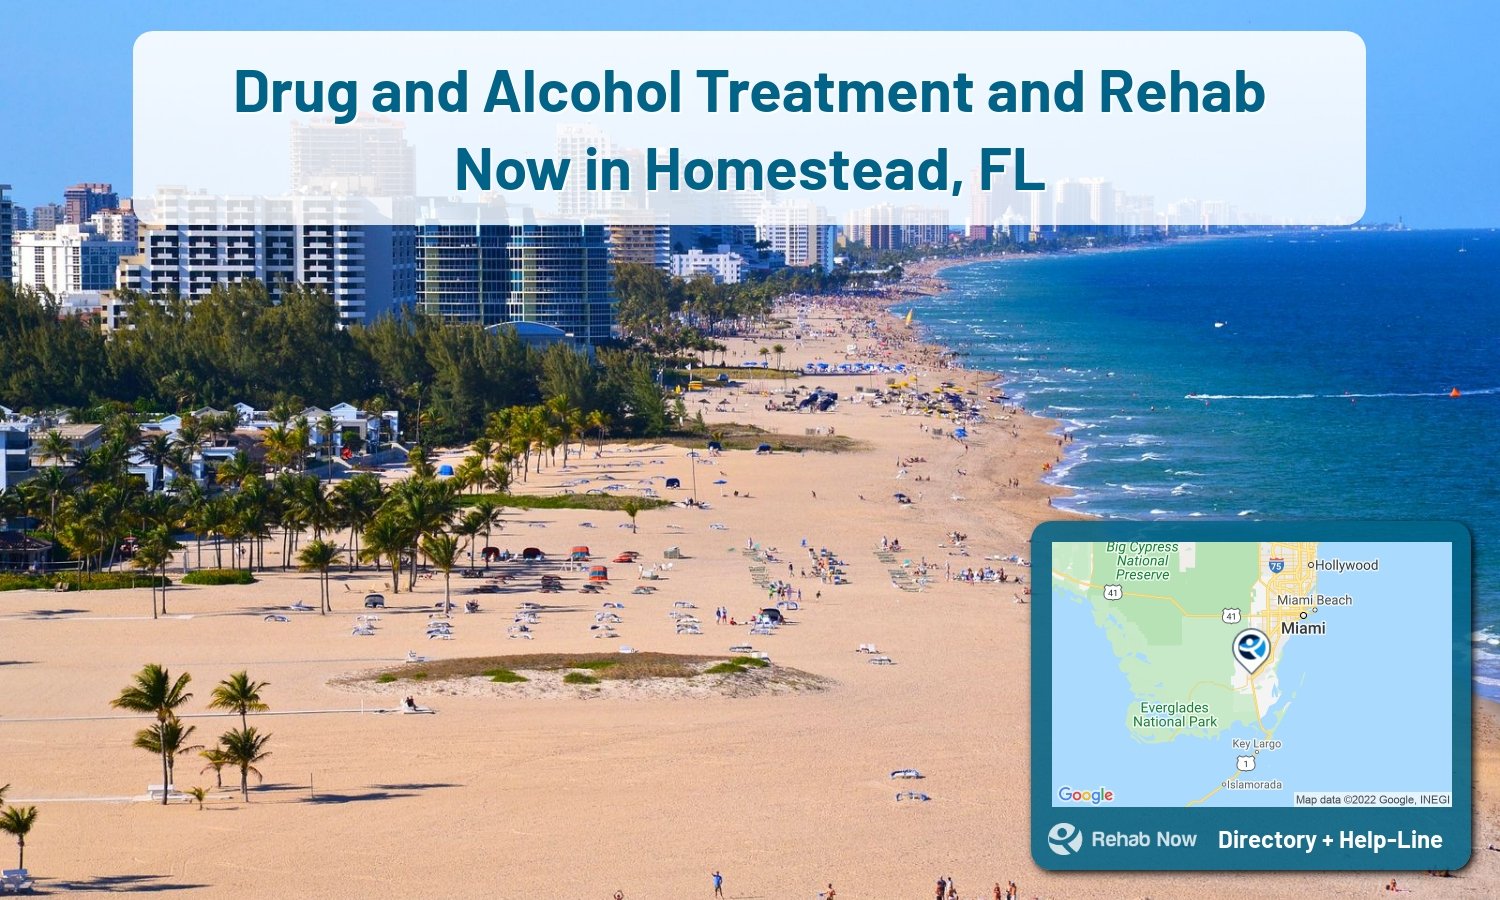 Our experts can help you find treatment now in Homestead, Florida. We list drug rehab and alcohol centers in Florida.